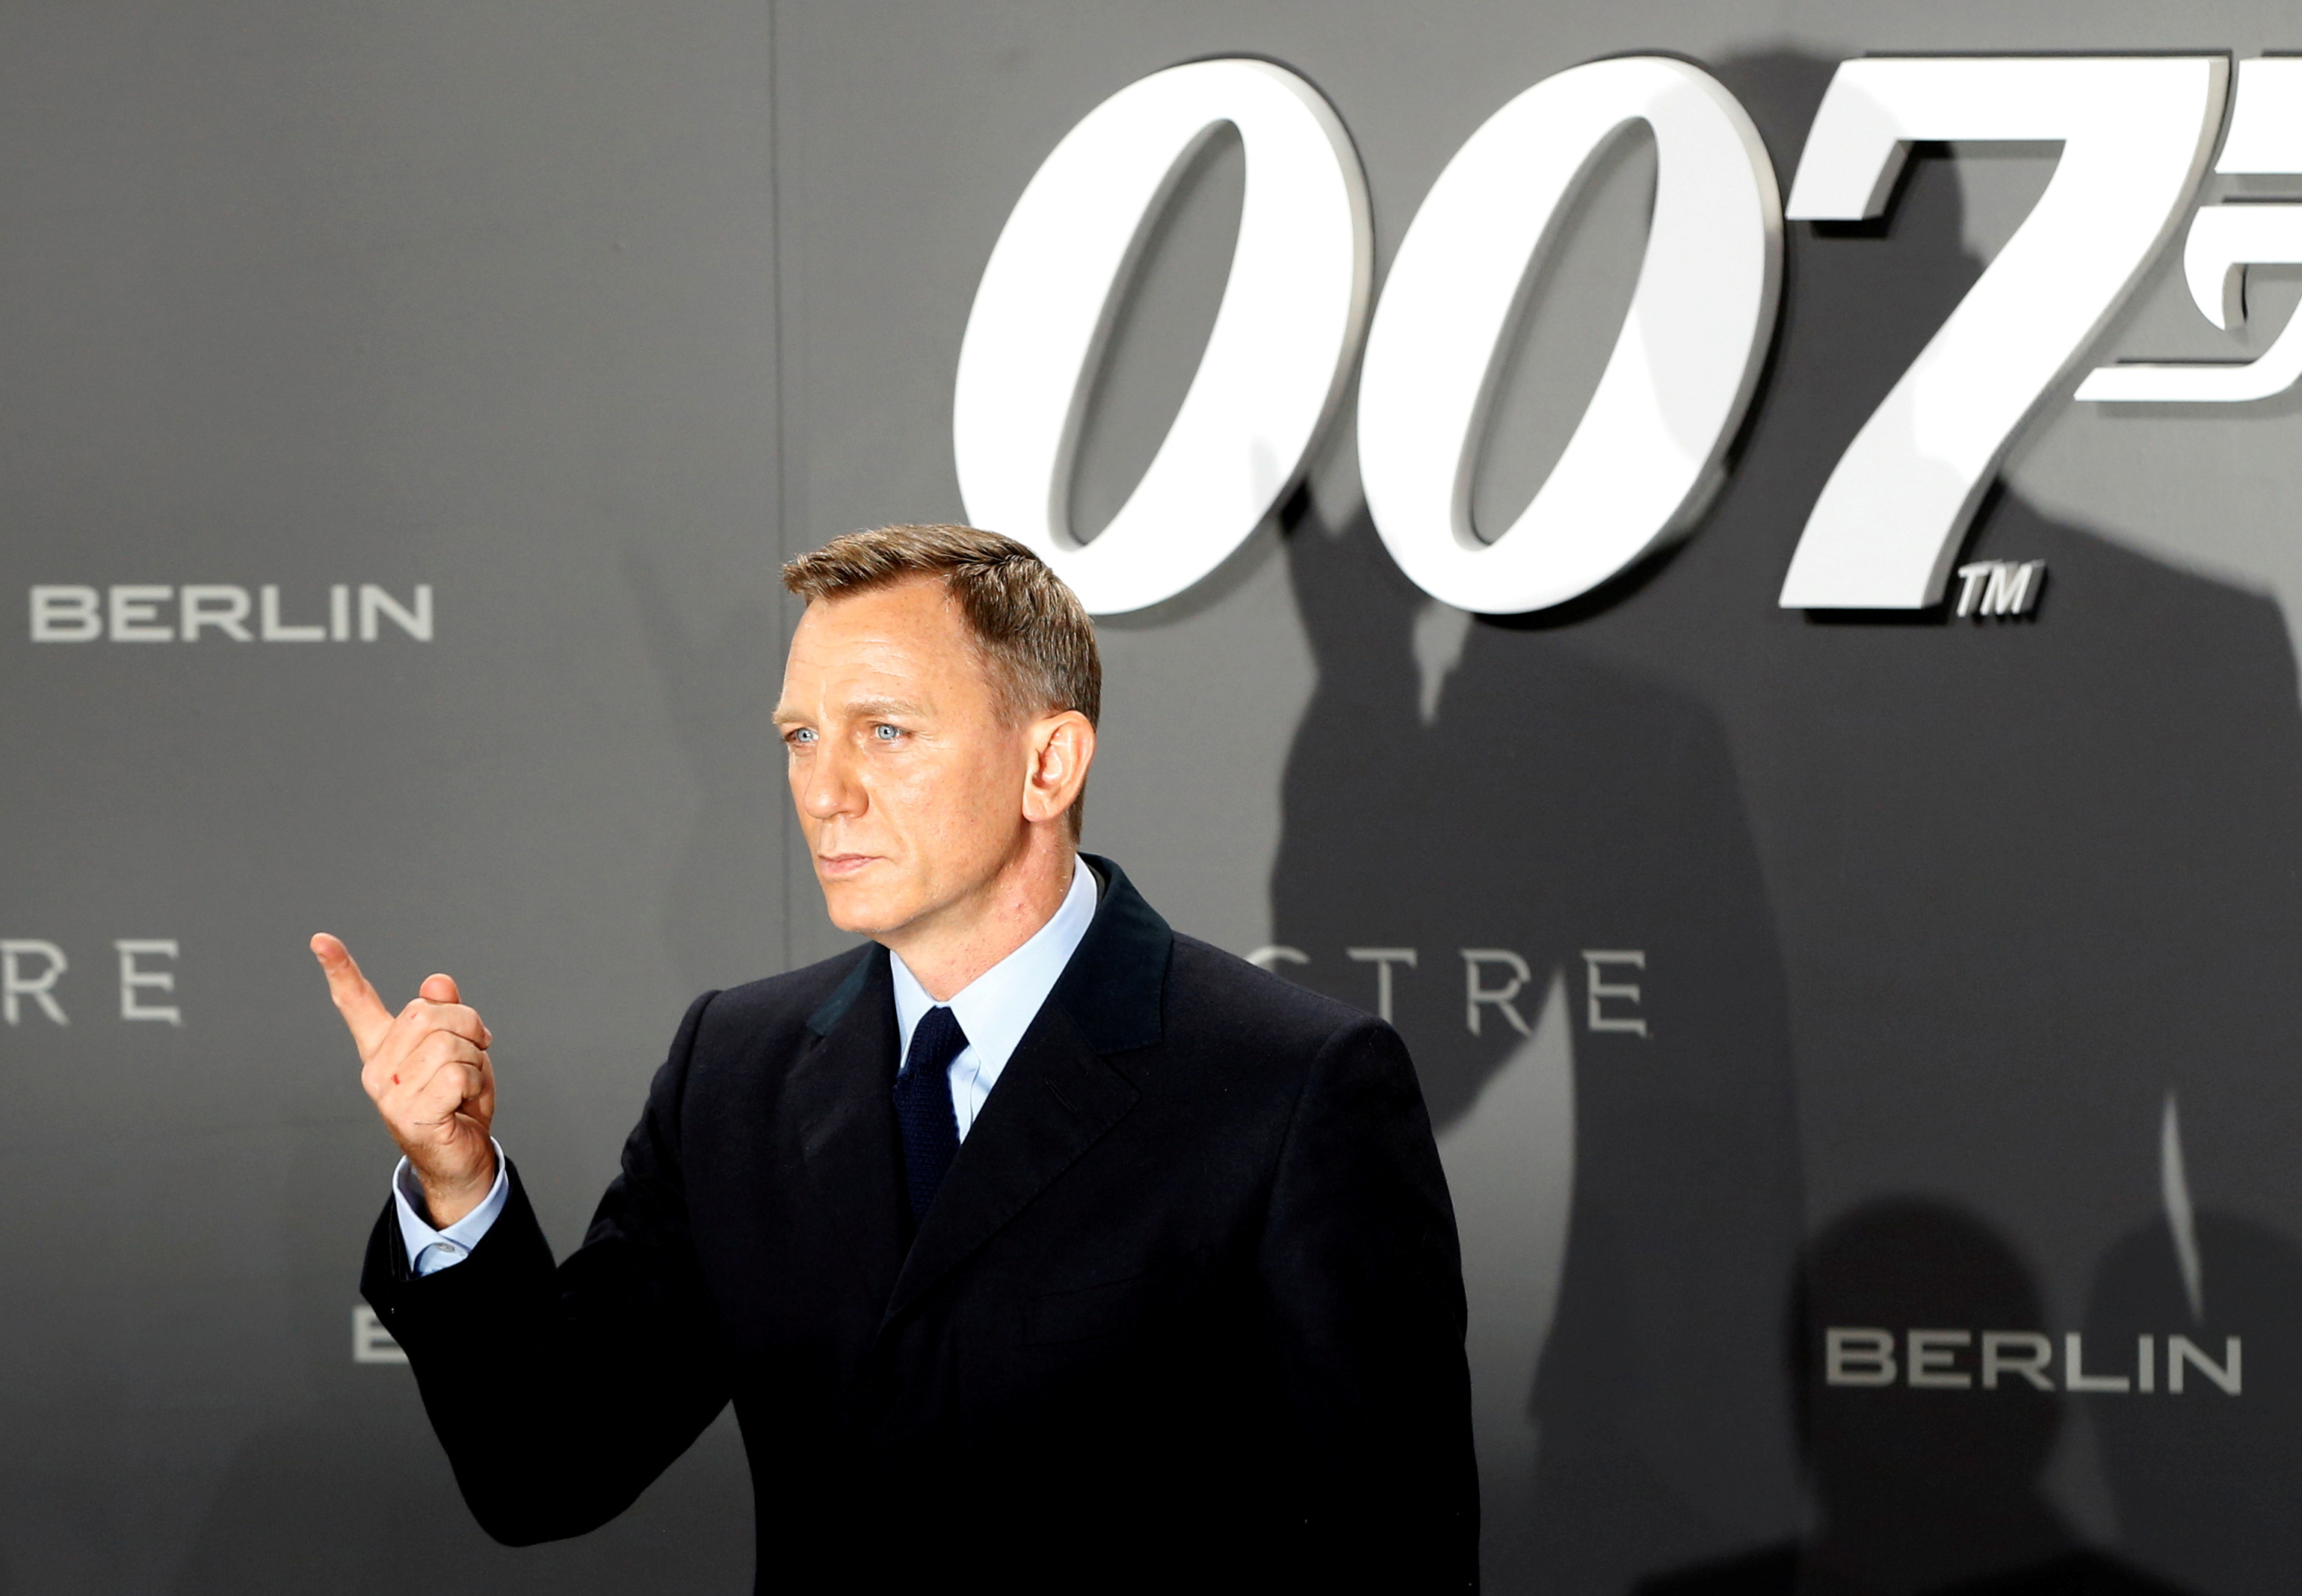 spectre full movie download mp4 in english